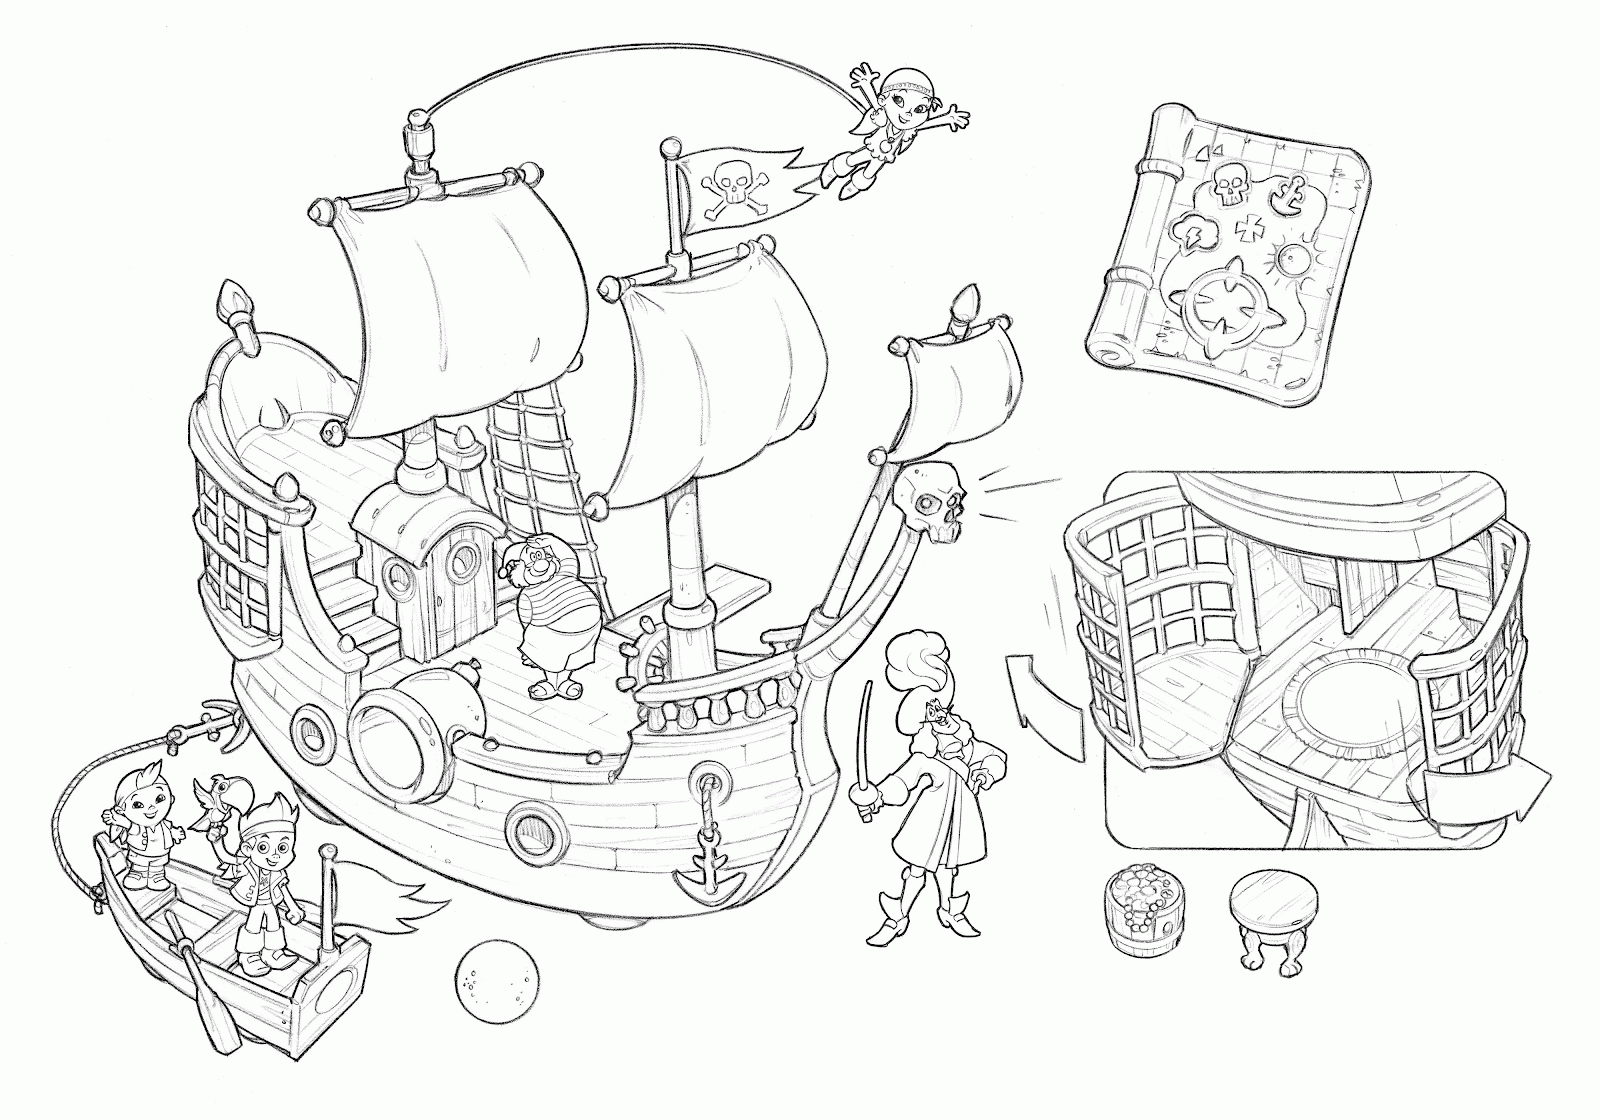 Captain Hook Pirate Ship Coloring Page - Coloring Pages For All Ages